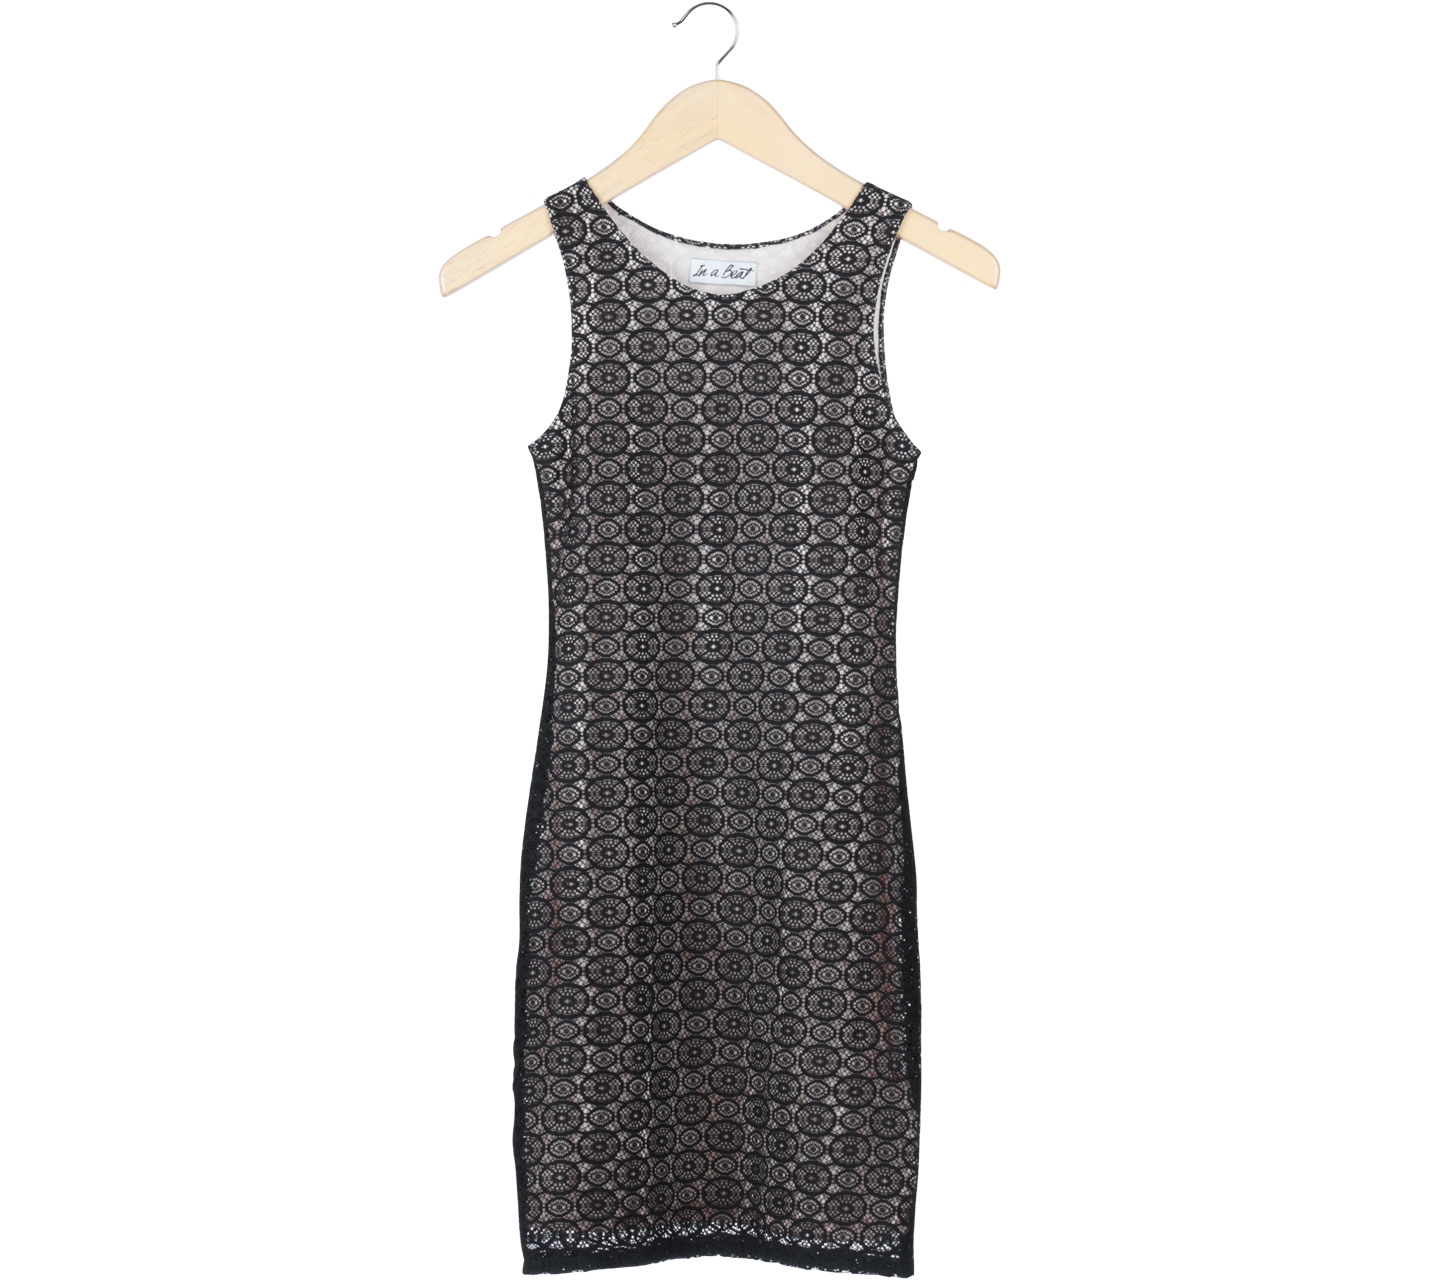 In A Beat Black And Cream Lace Sleeveless Mini Dress